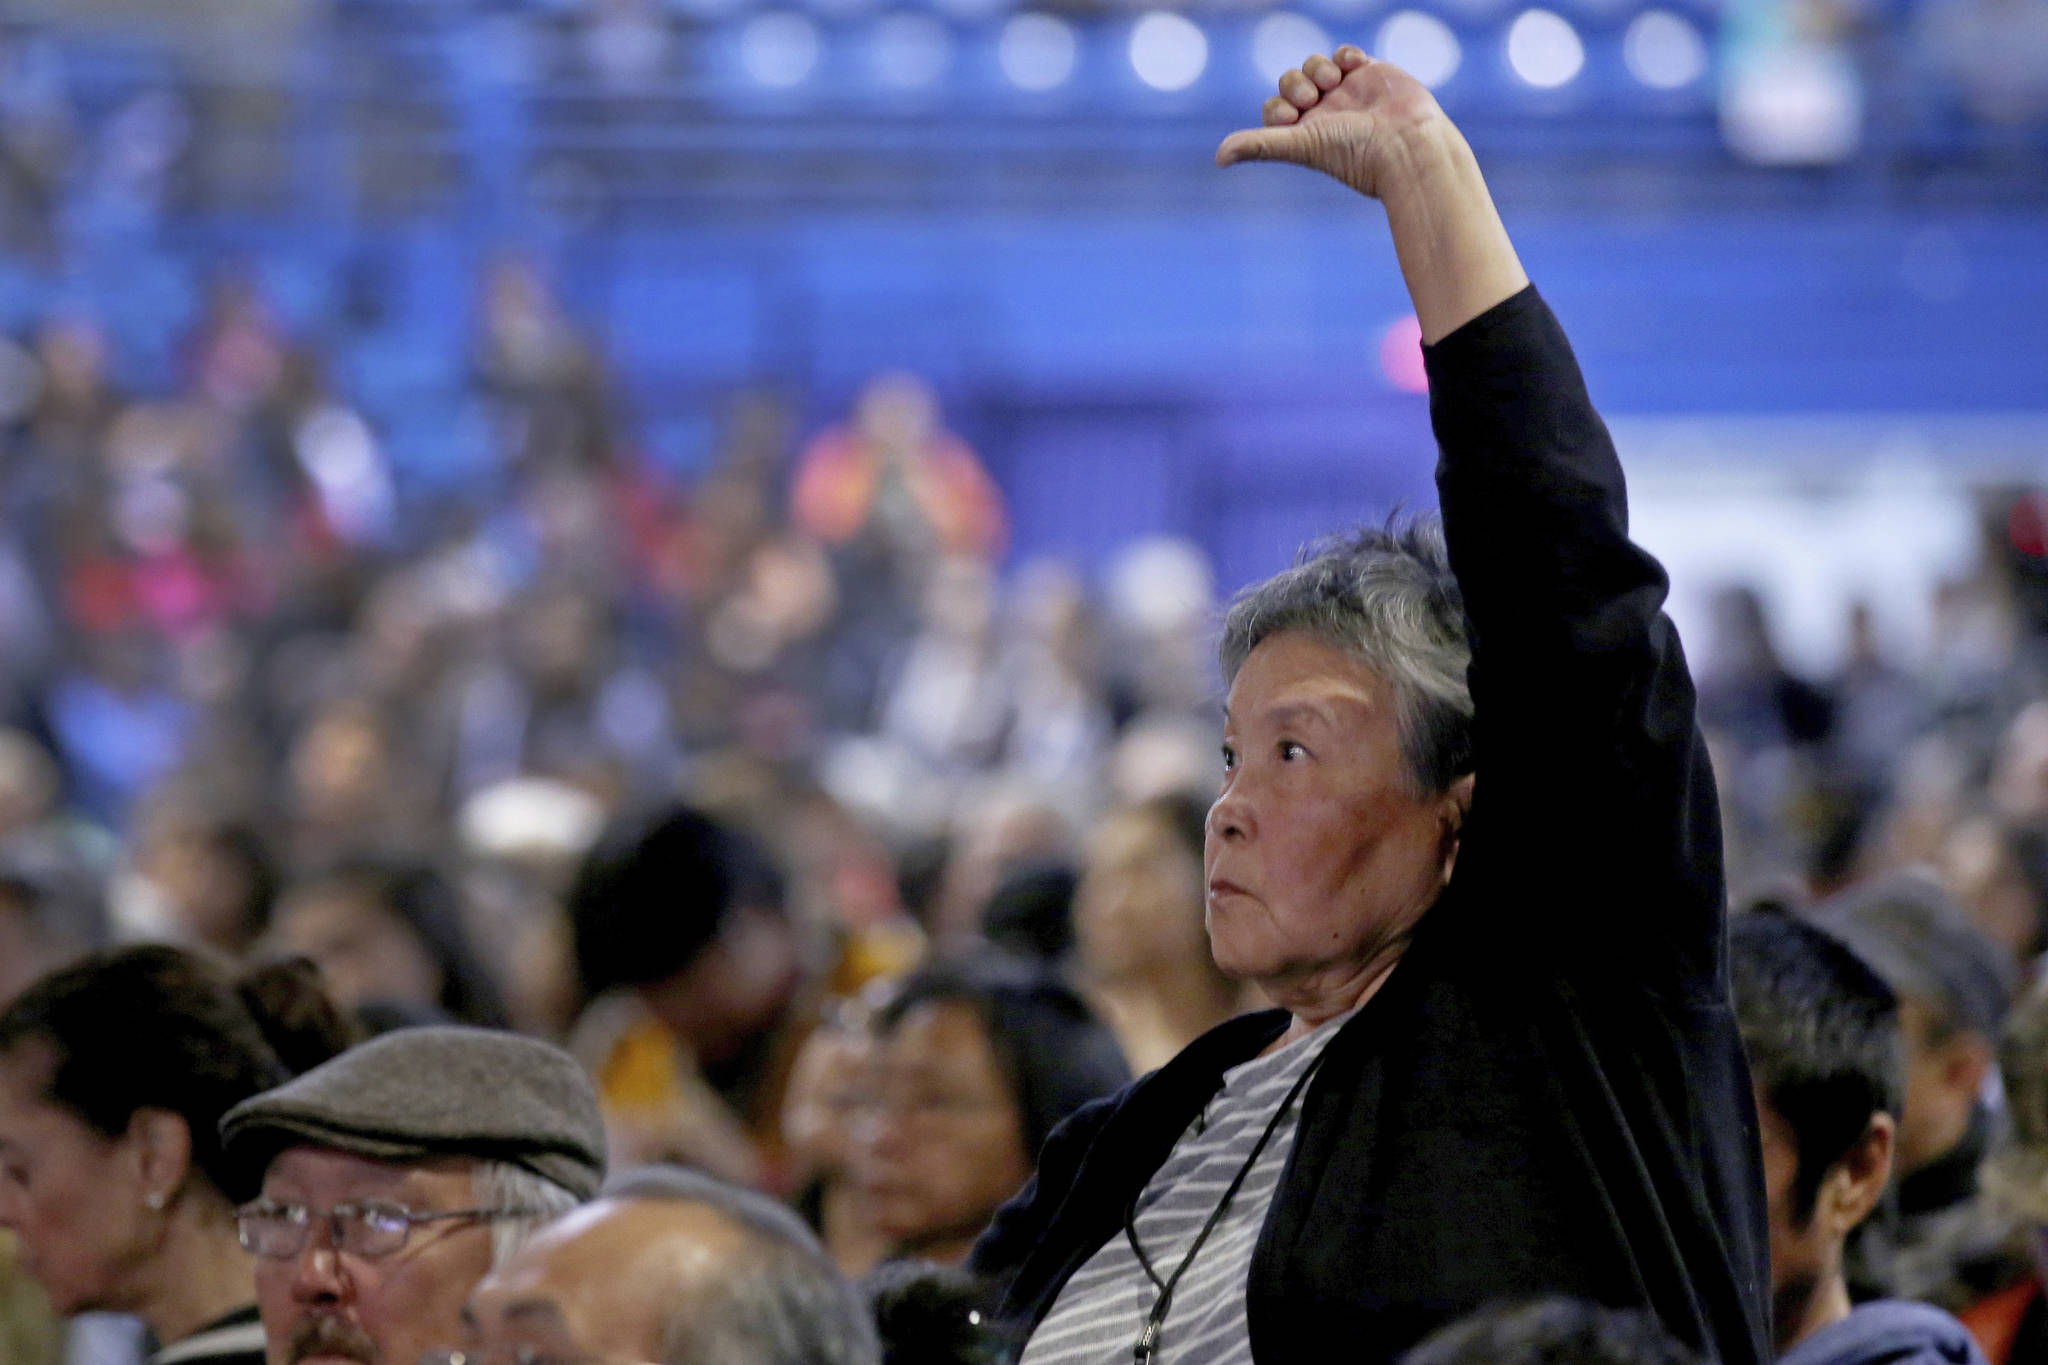 Dorothy Thomson stands while giving a thumbs down as Gov. Mike Dunleavy gives his State of Alaska Address during the 2019 Alaska Federation of Natives Convention Thursday, Oct. 17, 2019, in Fairbanks, Alaska. Republican Alaska Gov. Mike Dunleavy outlined plans aimed at improving public safety in rural Alaska during a speech Thursday to a major gathering of Alaska Natives that was interrupted by protests.(Eric Engman/Fairbanks Daily News-Miner via AP)